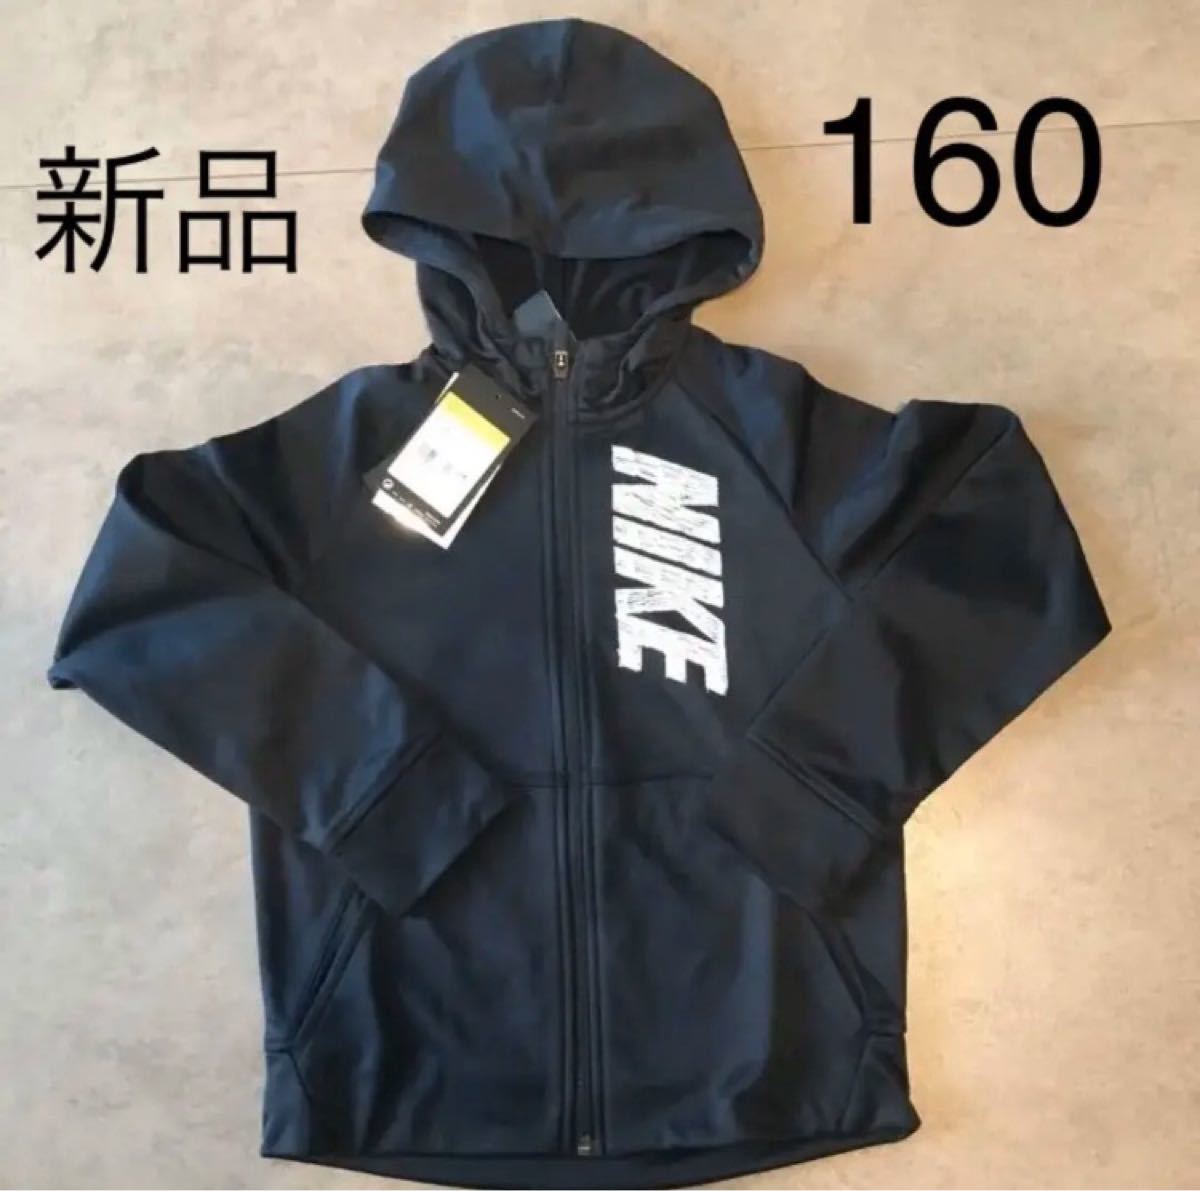 Paypayフリマ 新品 Nike キッズ パーカー 160 ナイキ キッズパーカー ナイキキッズ